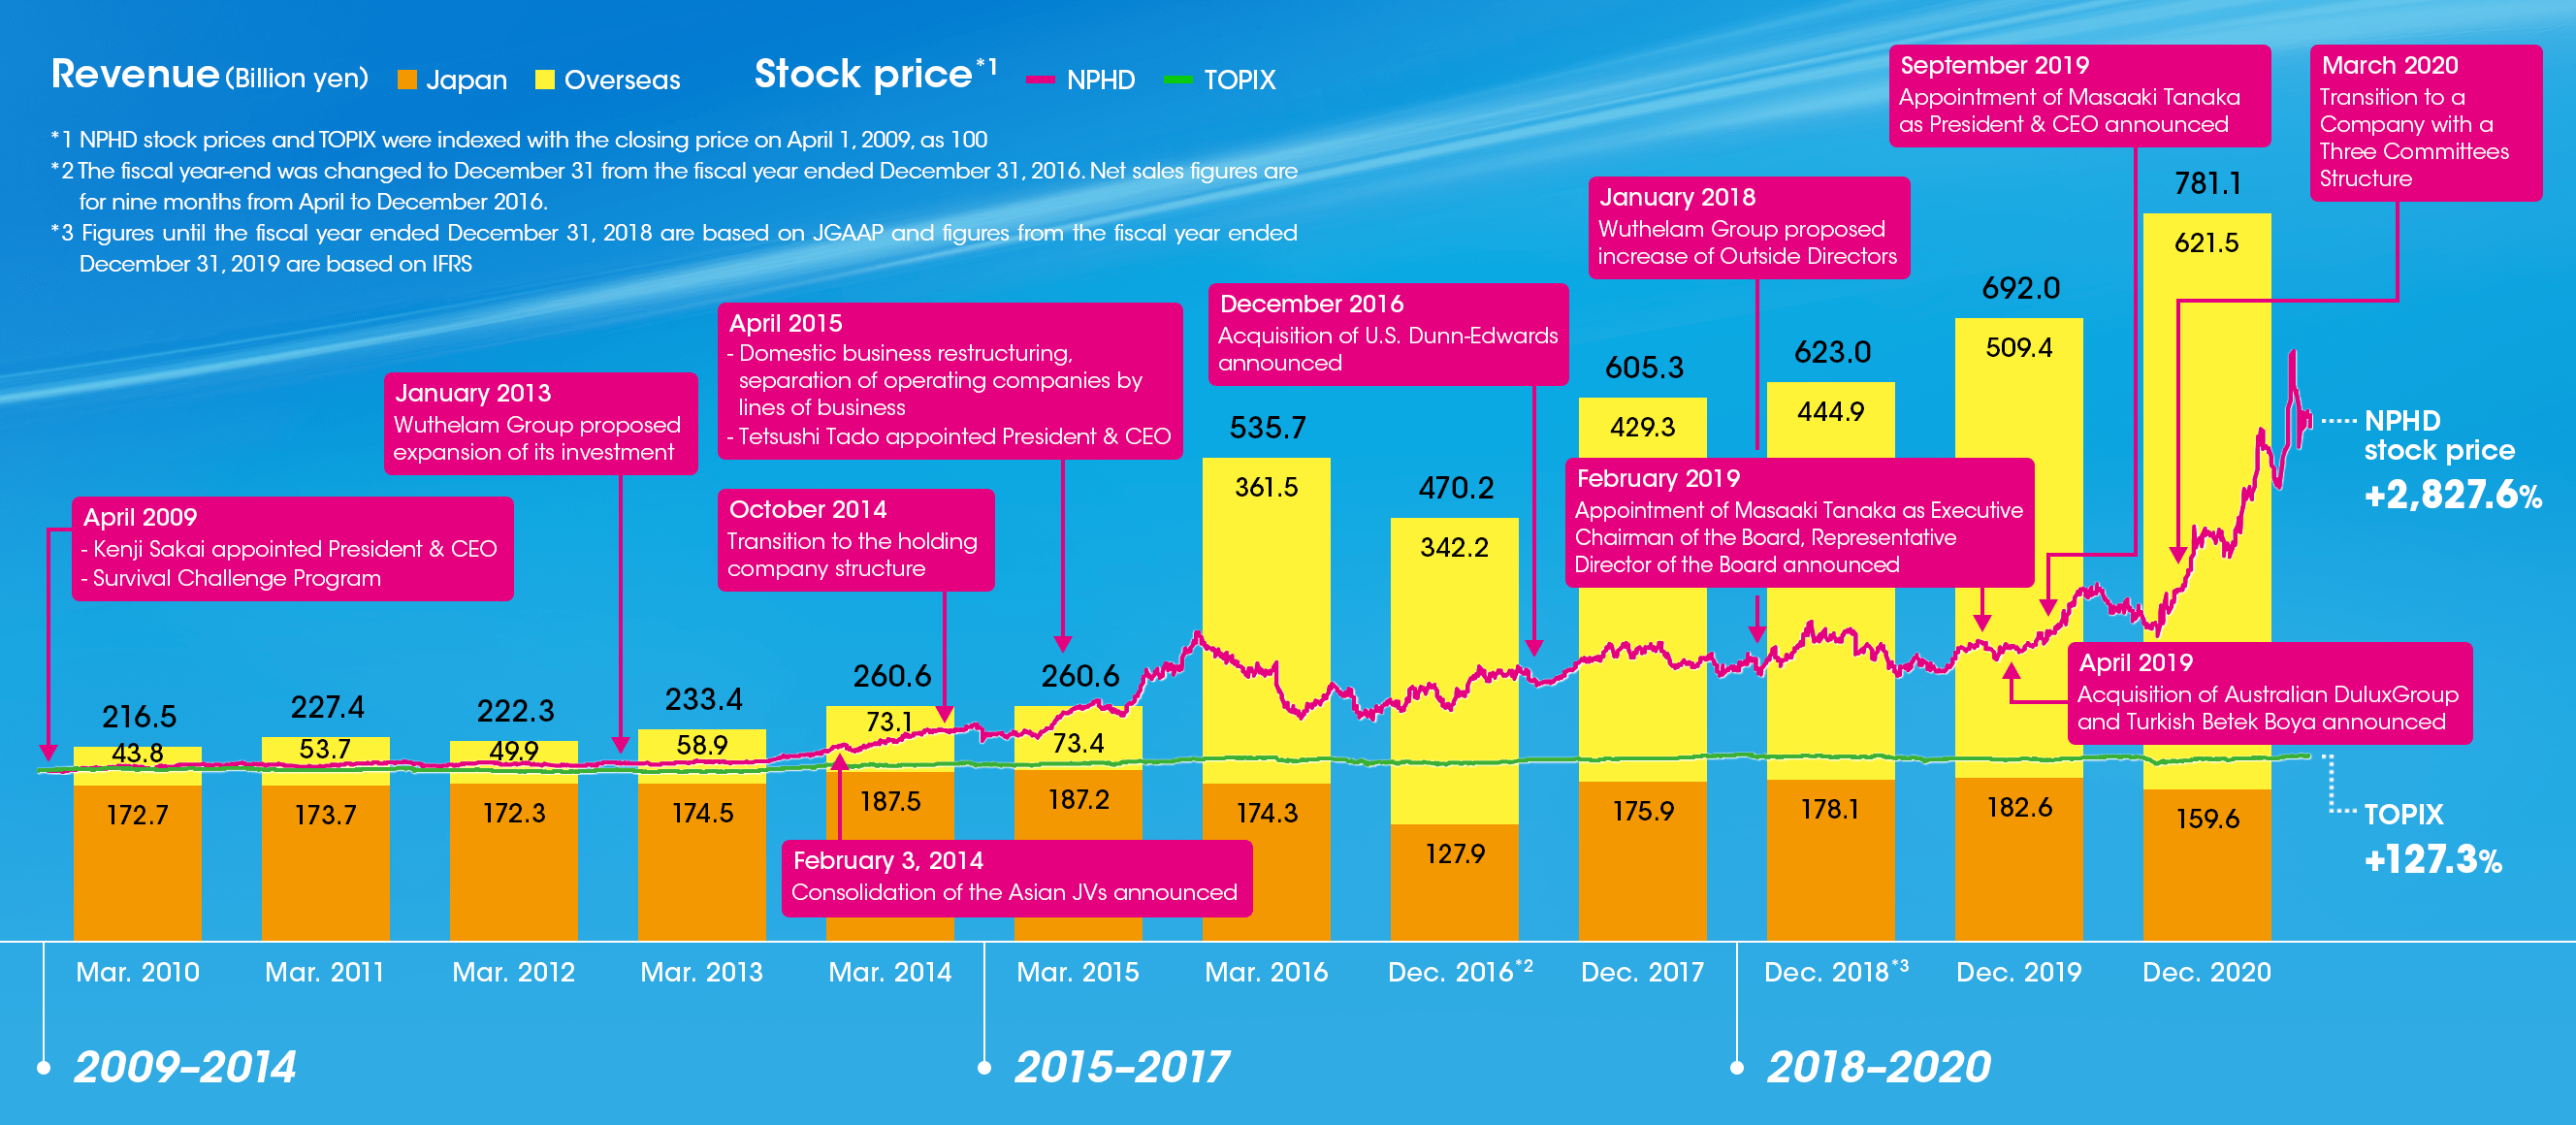 Path of Revenue and Stock Price